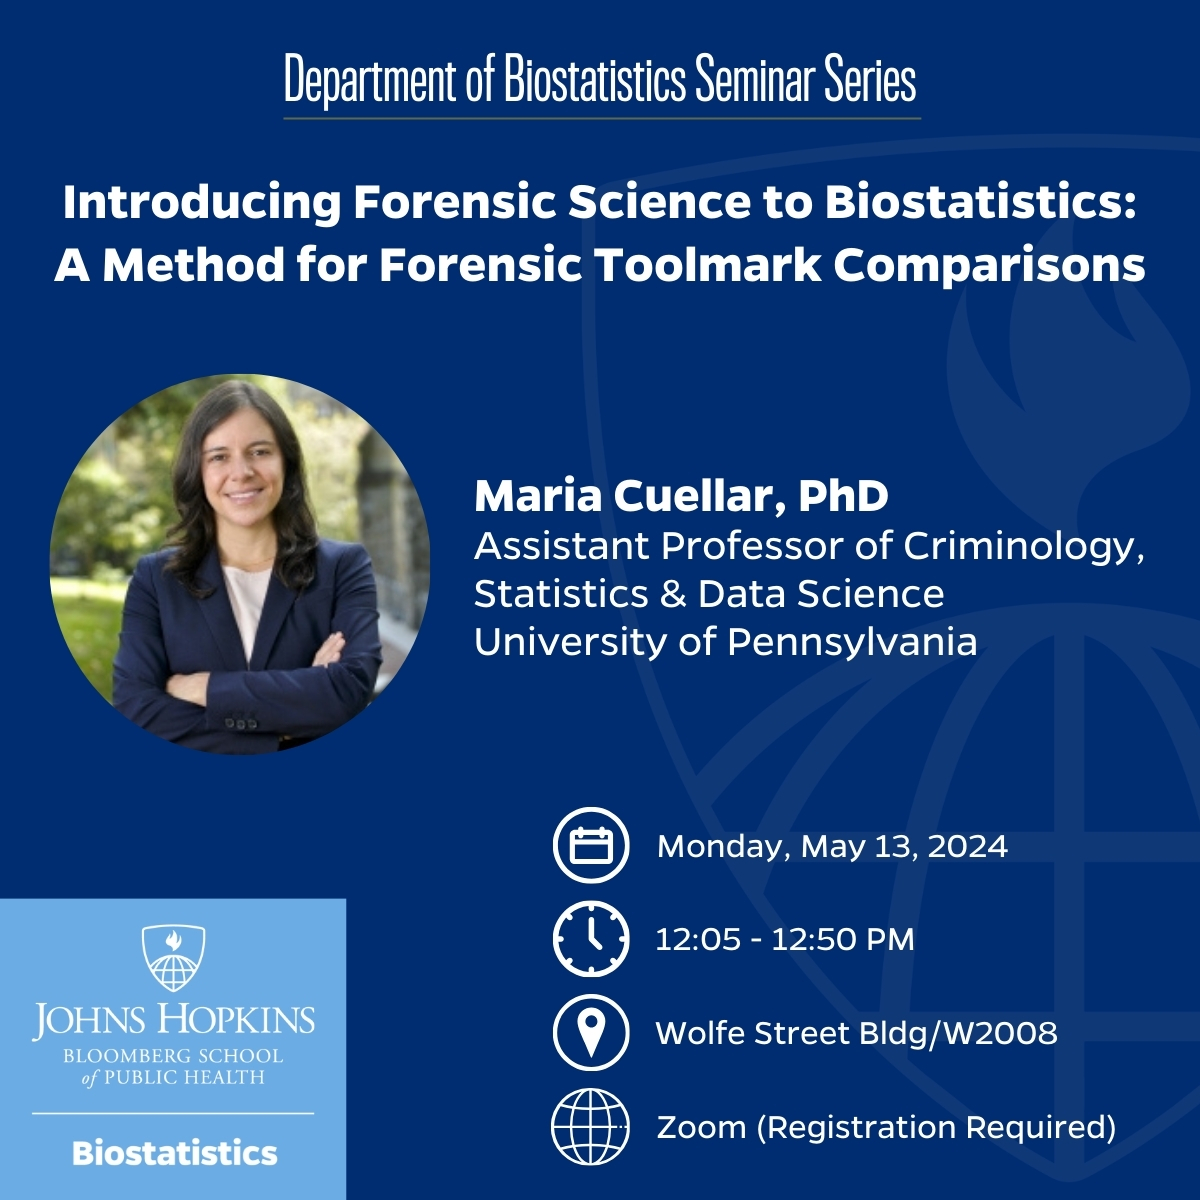 Join us next Monday, May 13, for our seminar with speaker @maria__cuellar, Asst. Prof. of Criminology, Statistics & Data Science @Penn. Register online to watch via Zoom: publichealth.jhu.edu/events/2024/bi…